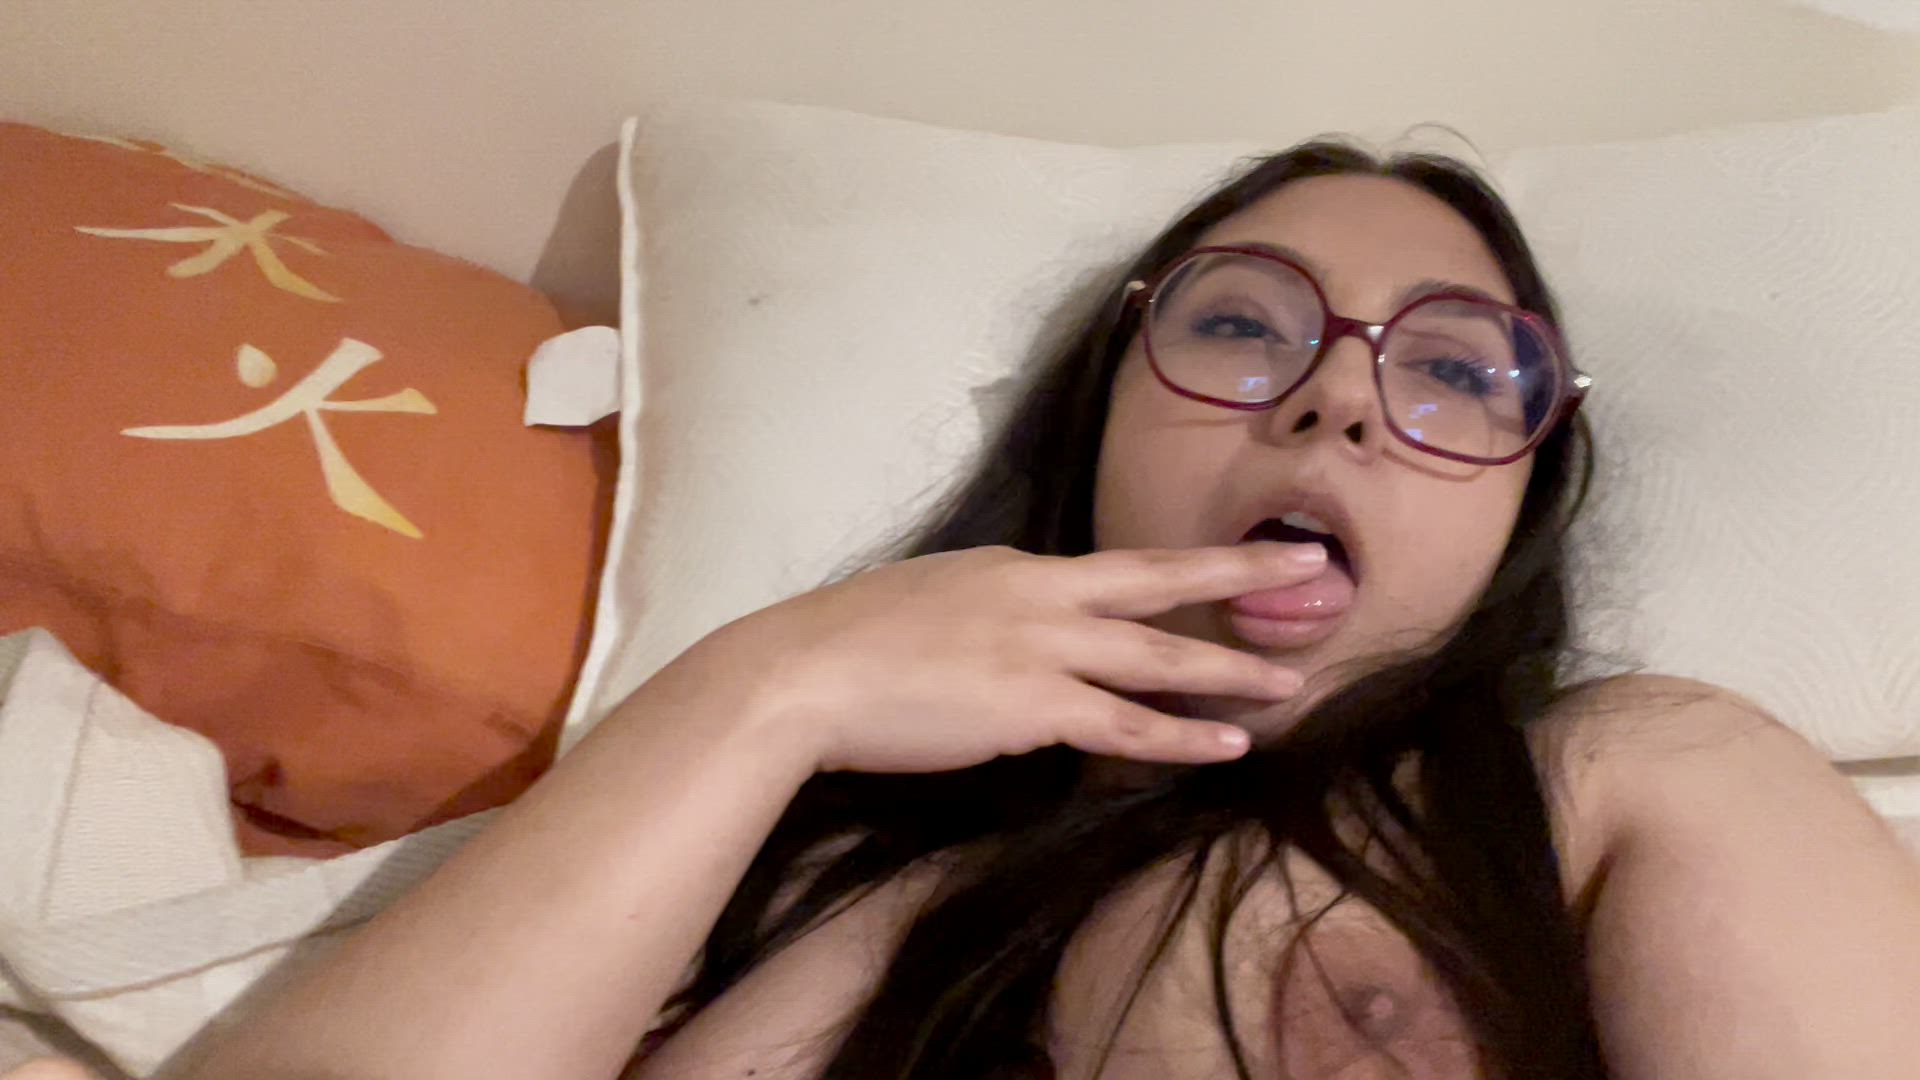 Latina porn video with onlyfans model lilybest <strong>@lilybest</strong>